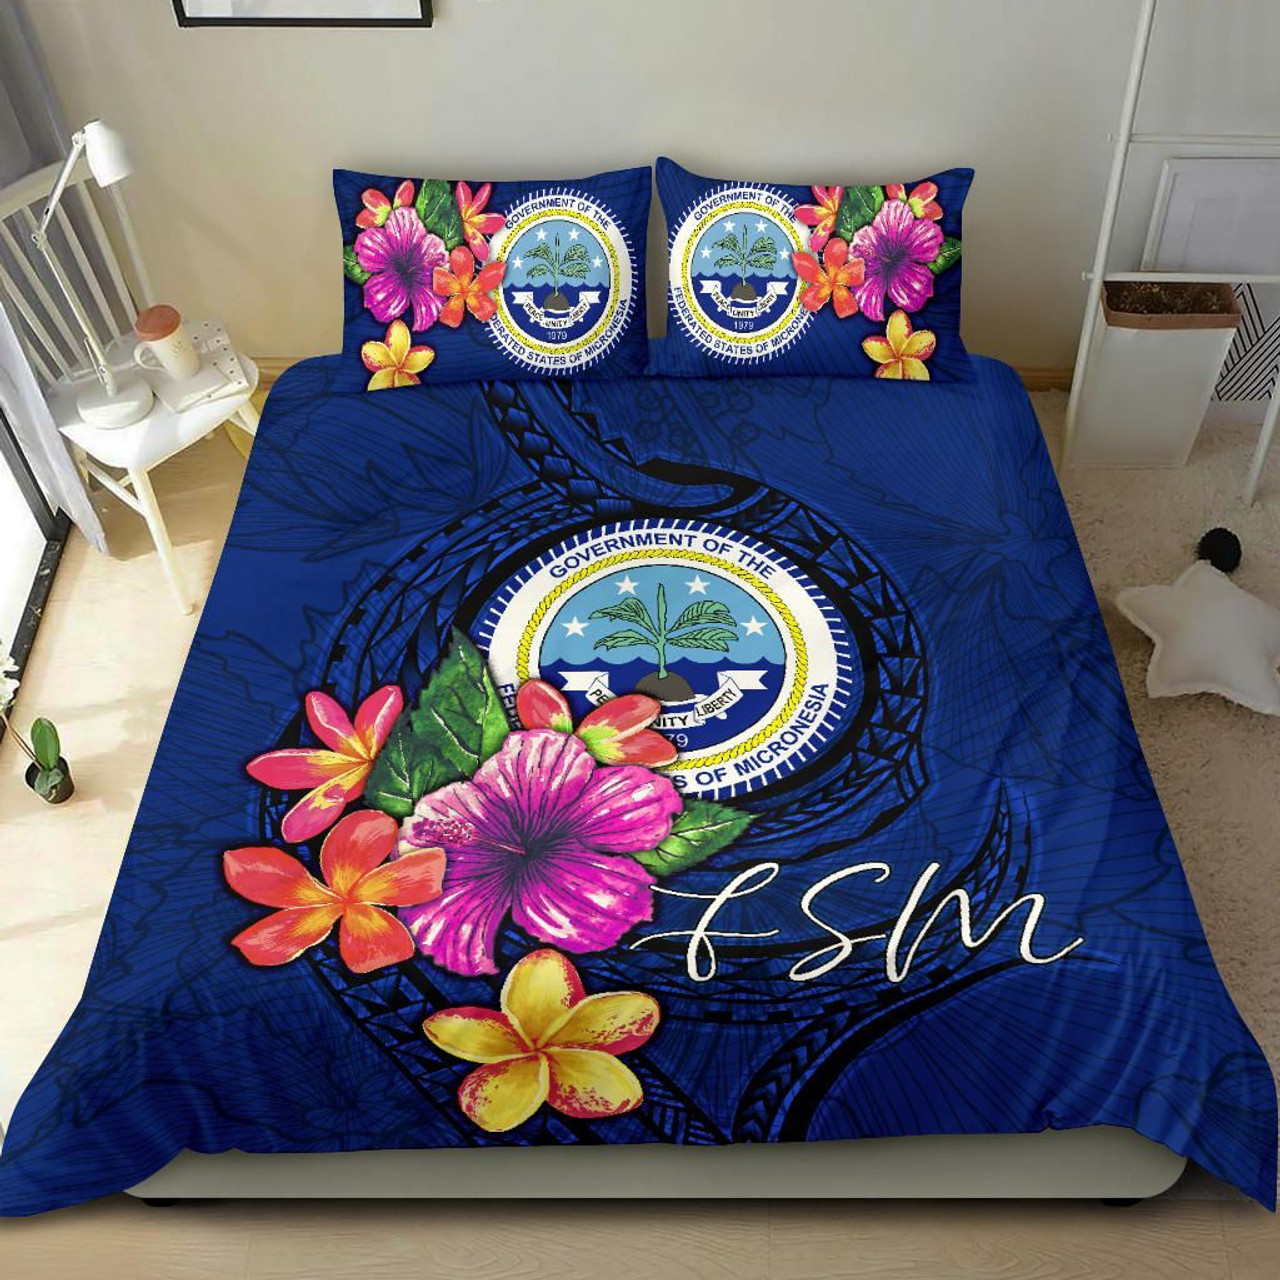 Micronesia Bedding Set - Federated States Of Micronesia Duvet Cover Set Floral With Seal Blue 2